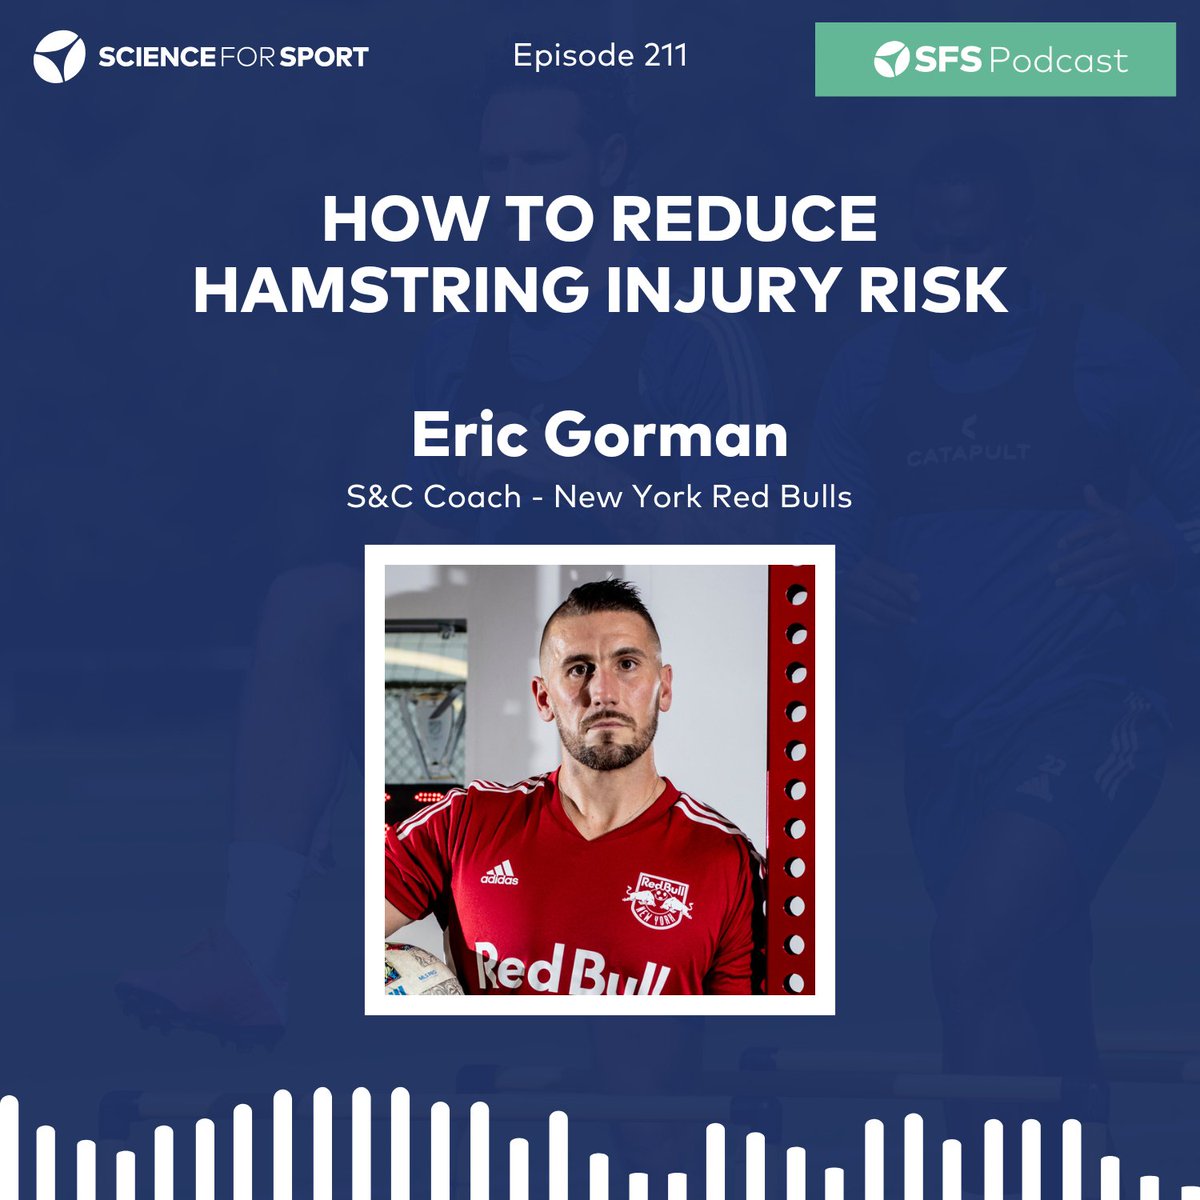 The top three moments for hamstring injuries in football ⚽ @gormancscs @Matt_Solomon110 Eric discusses hamstring injury risks in football, the multifactorial causes, and reducing injury risk 💊 scienceforsport.fireside.fm/212, or head to YouTube and streaming platforms to listen 🎙️